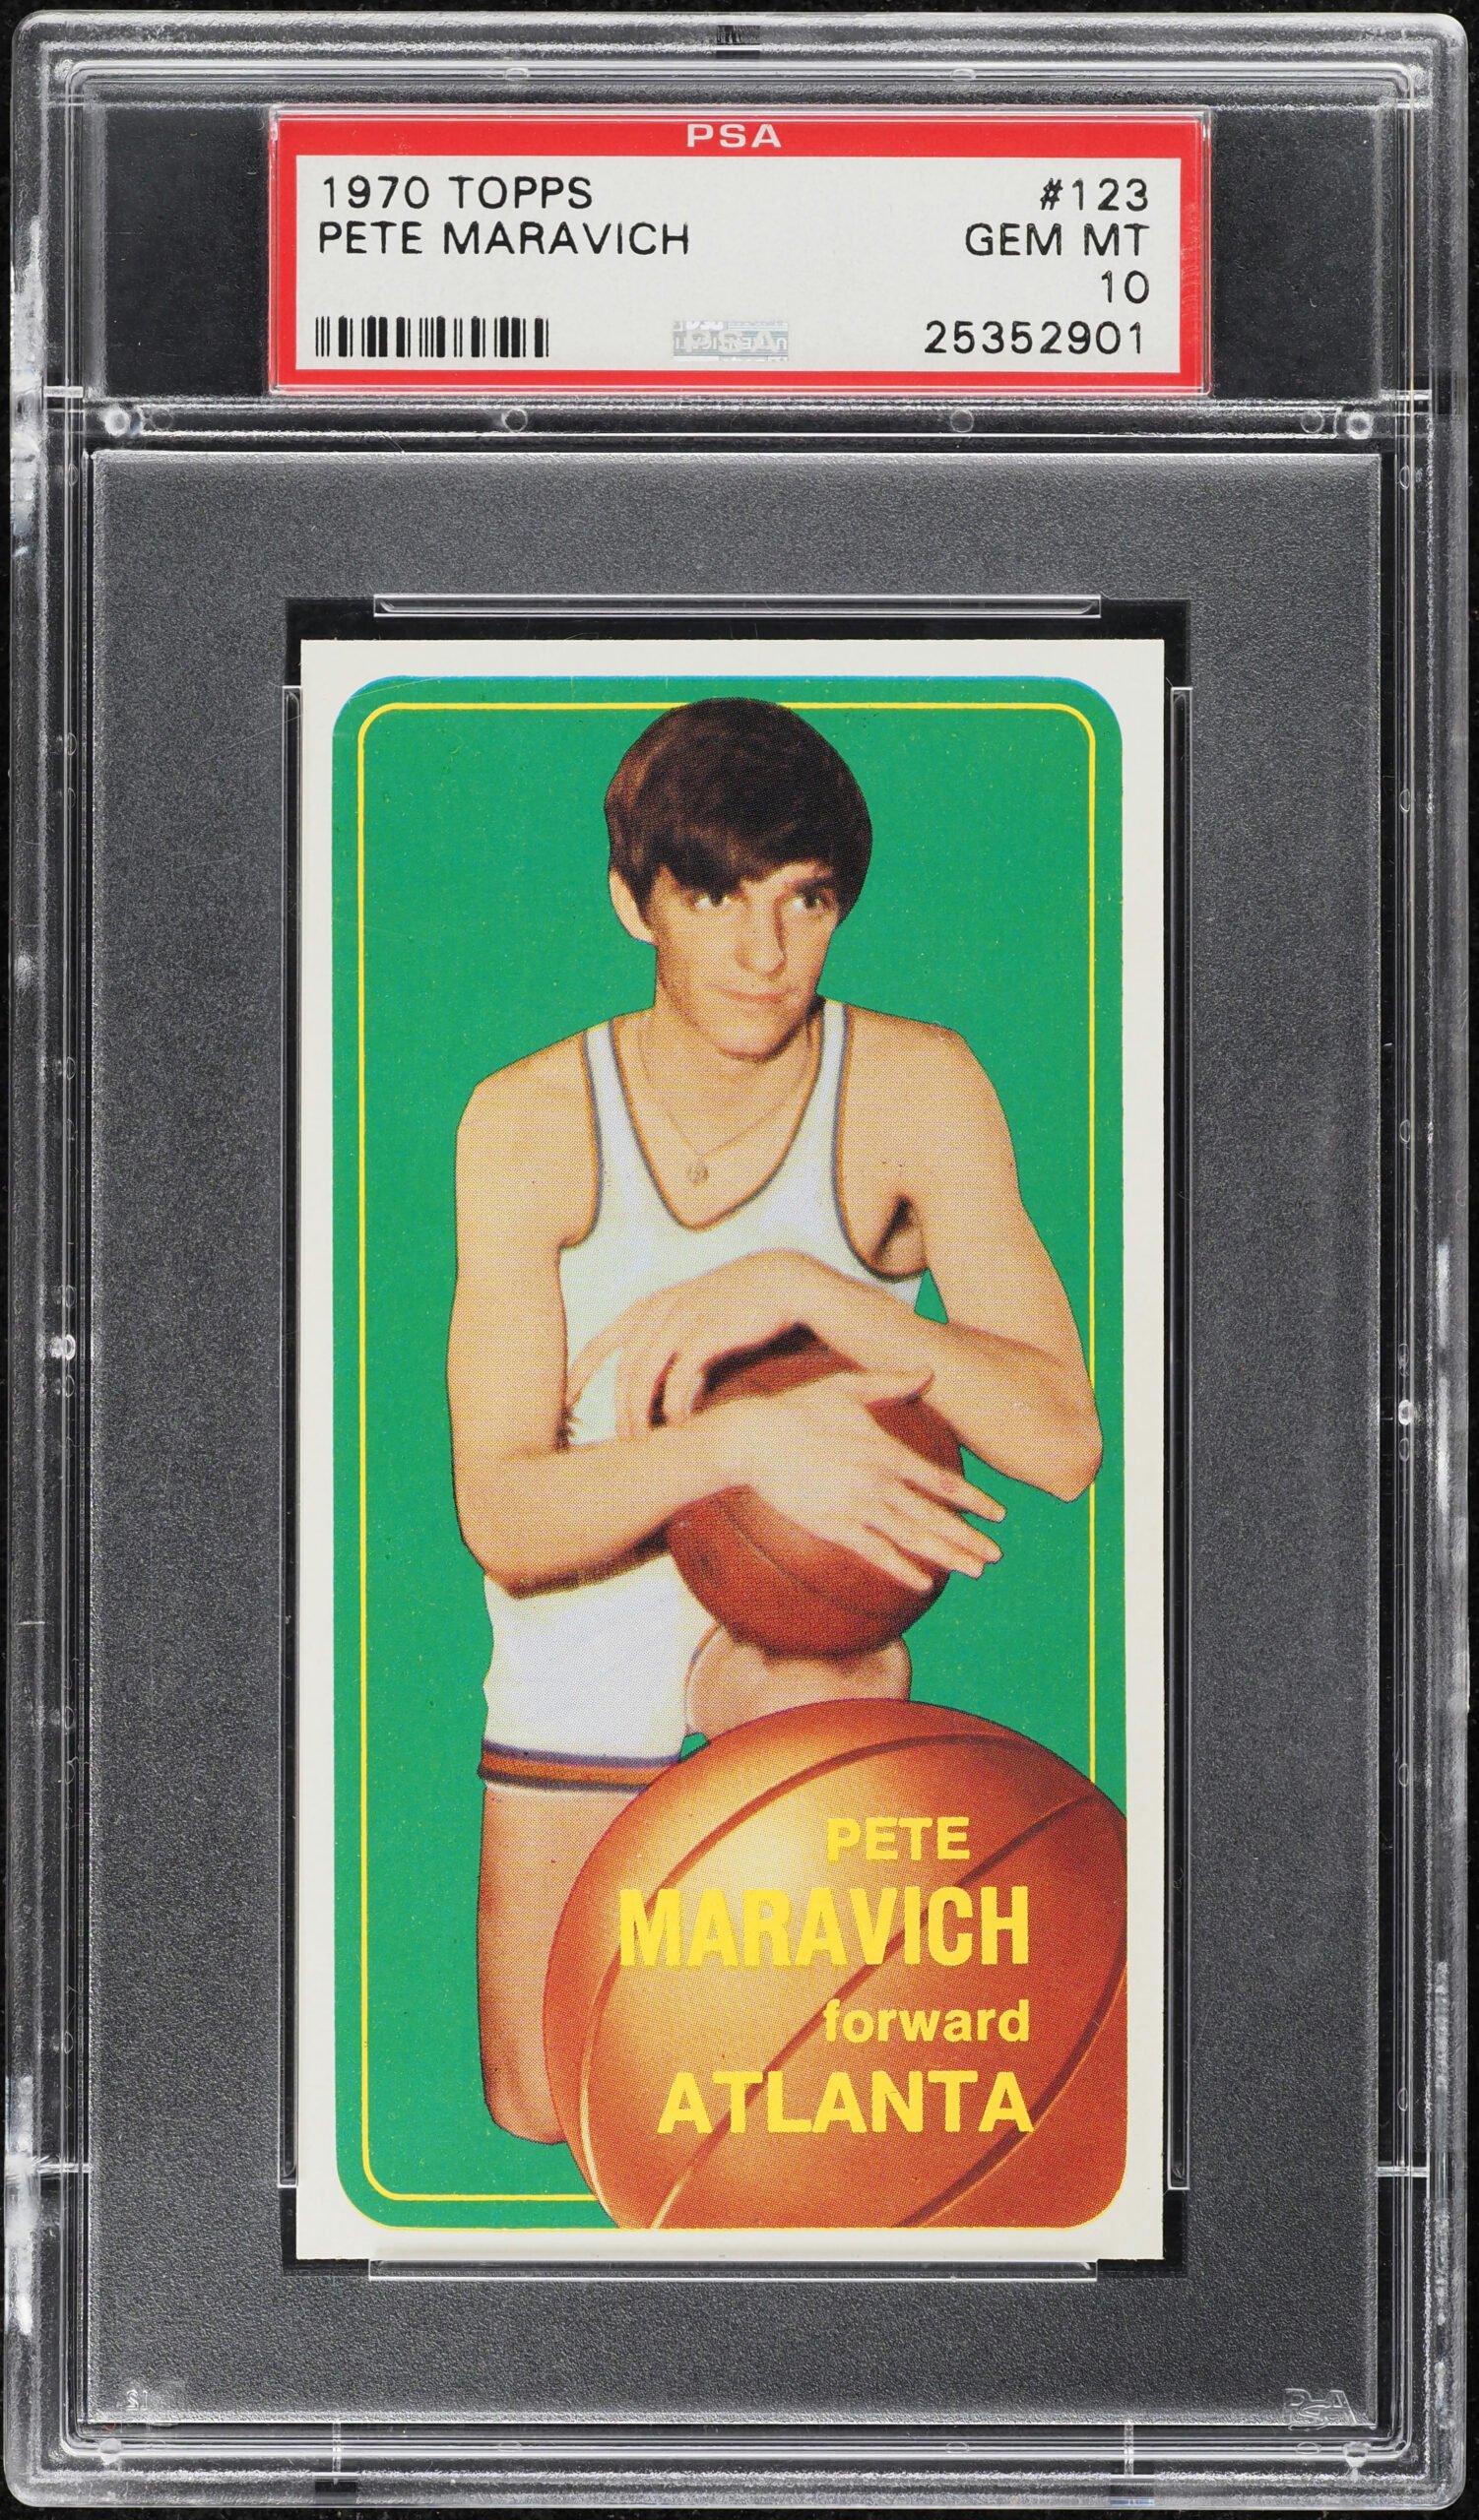 A History-Making Maravich: Panini America Documents Production of